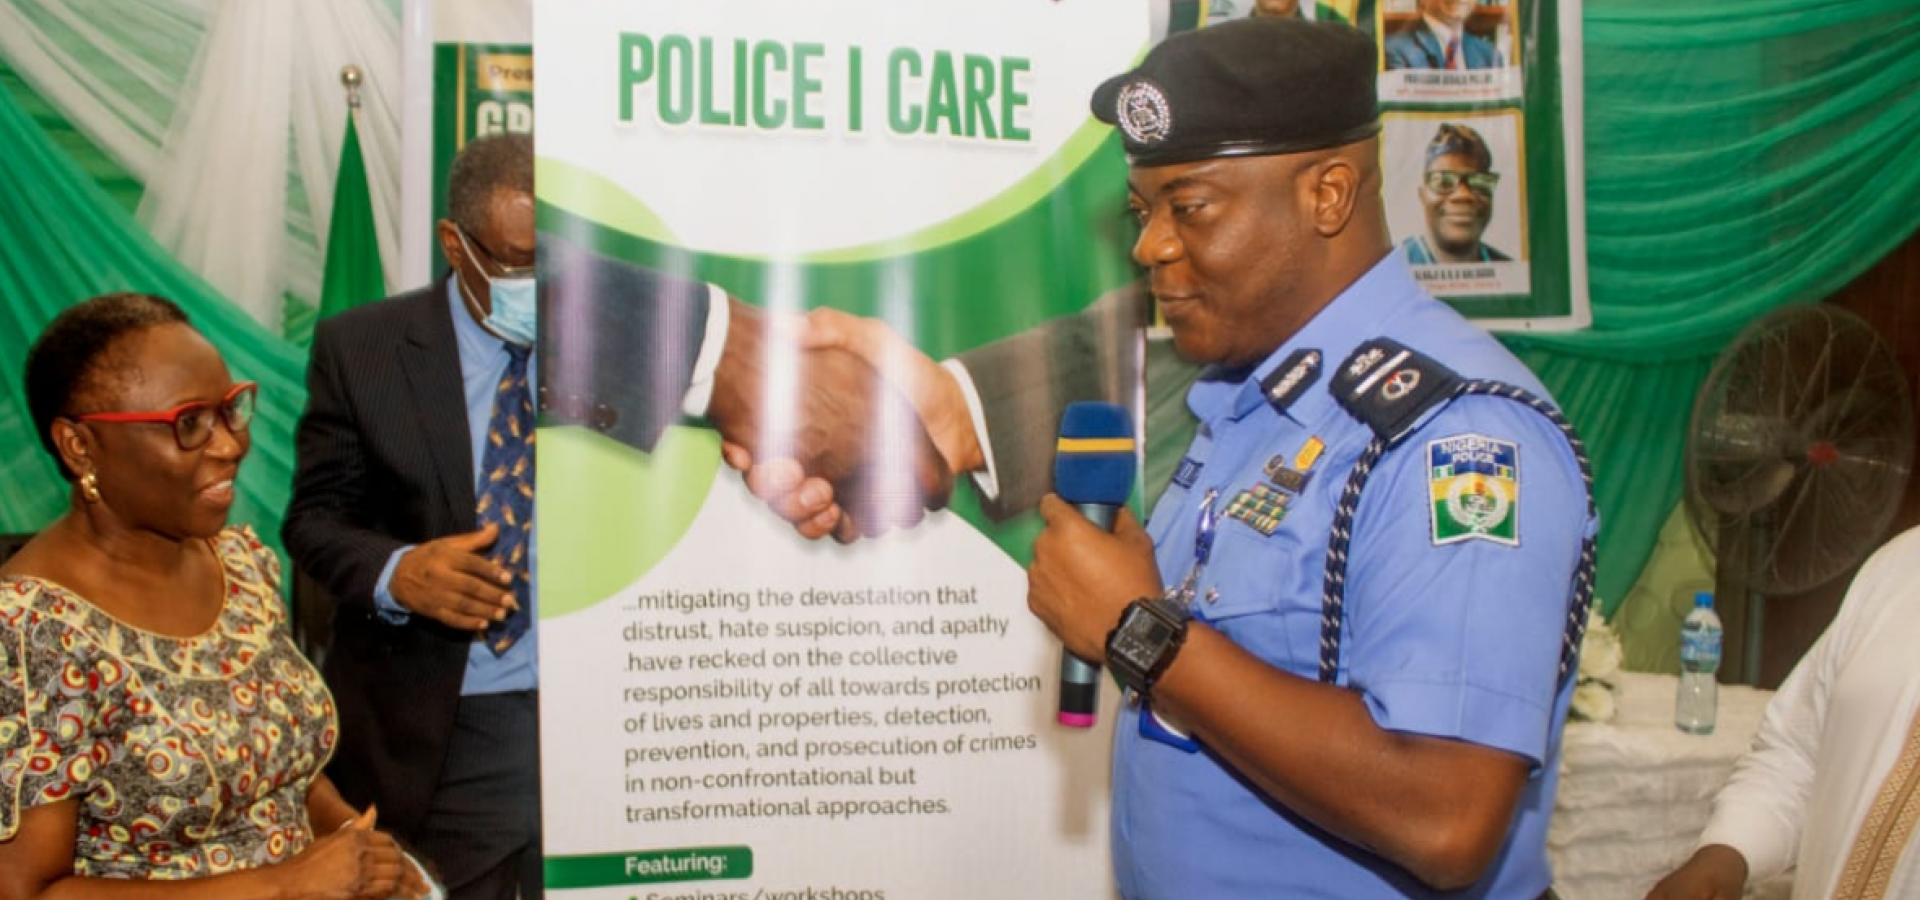 Assistant Inspector General of Police, Zone 2, Adeyinka Adeleke, unveiled the trust building programme, ‘Police I Care’ in Lagos